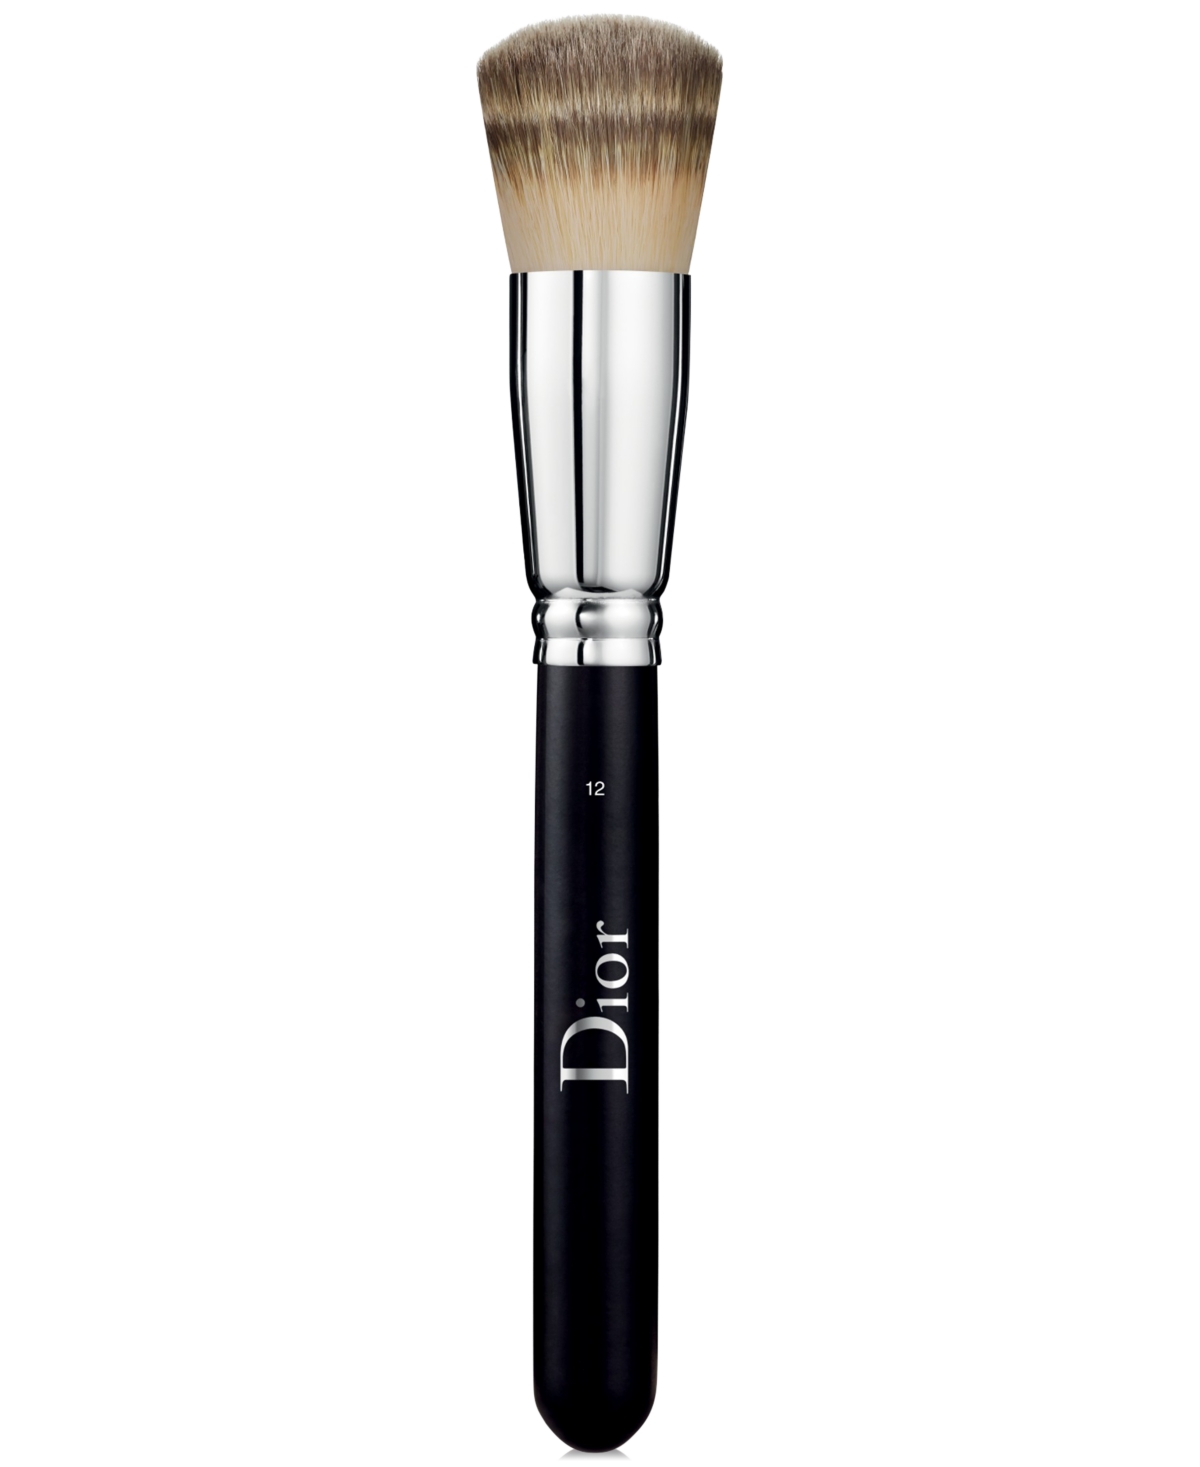 Dior Backstage Full Coverage Fluid Foundation Brush Nâ°12 In No Color